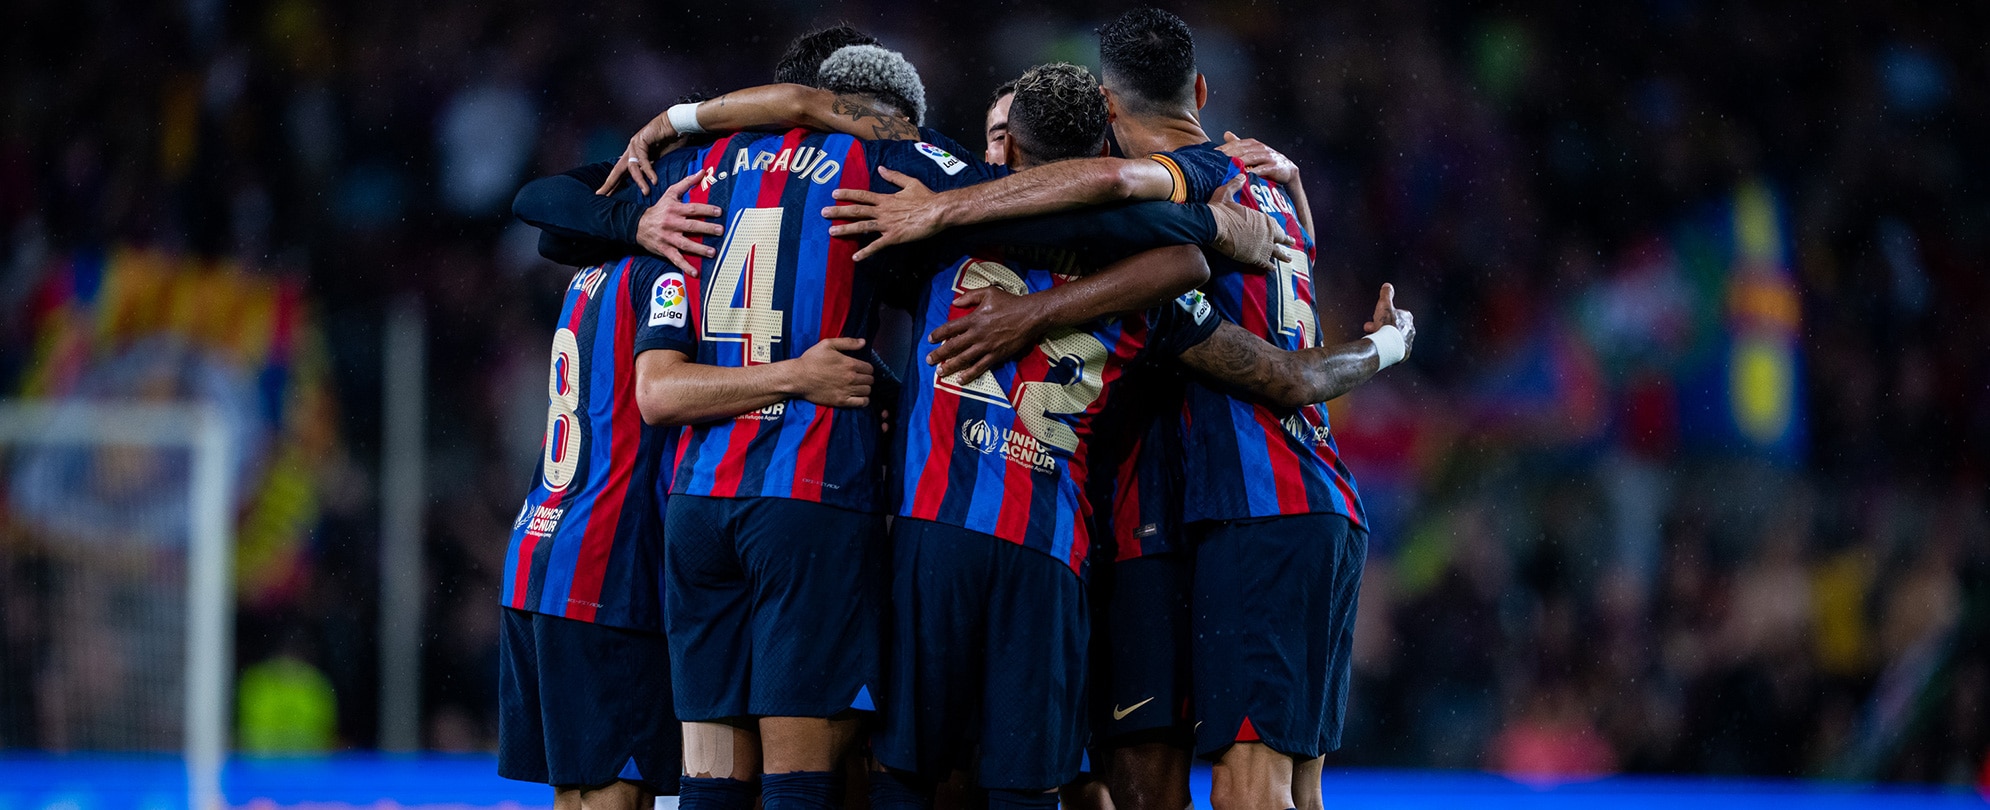 A group of Barcelona soccer players in a huddle.